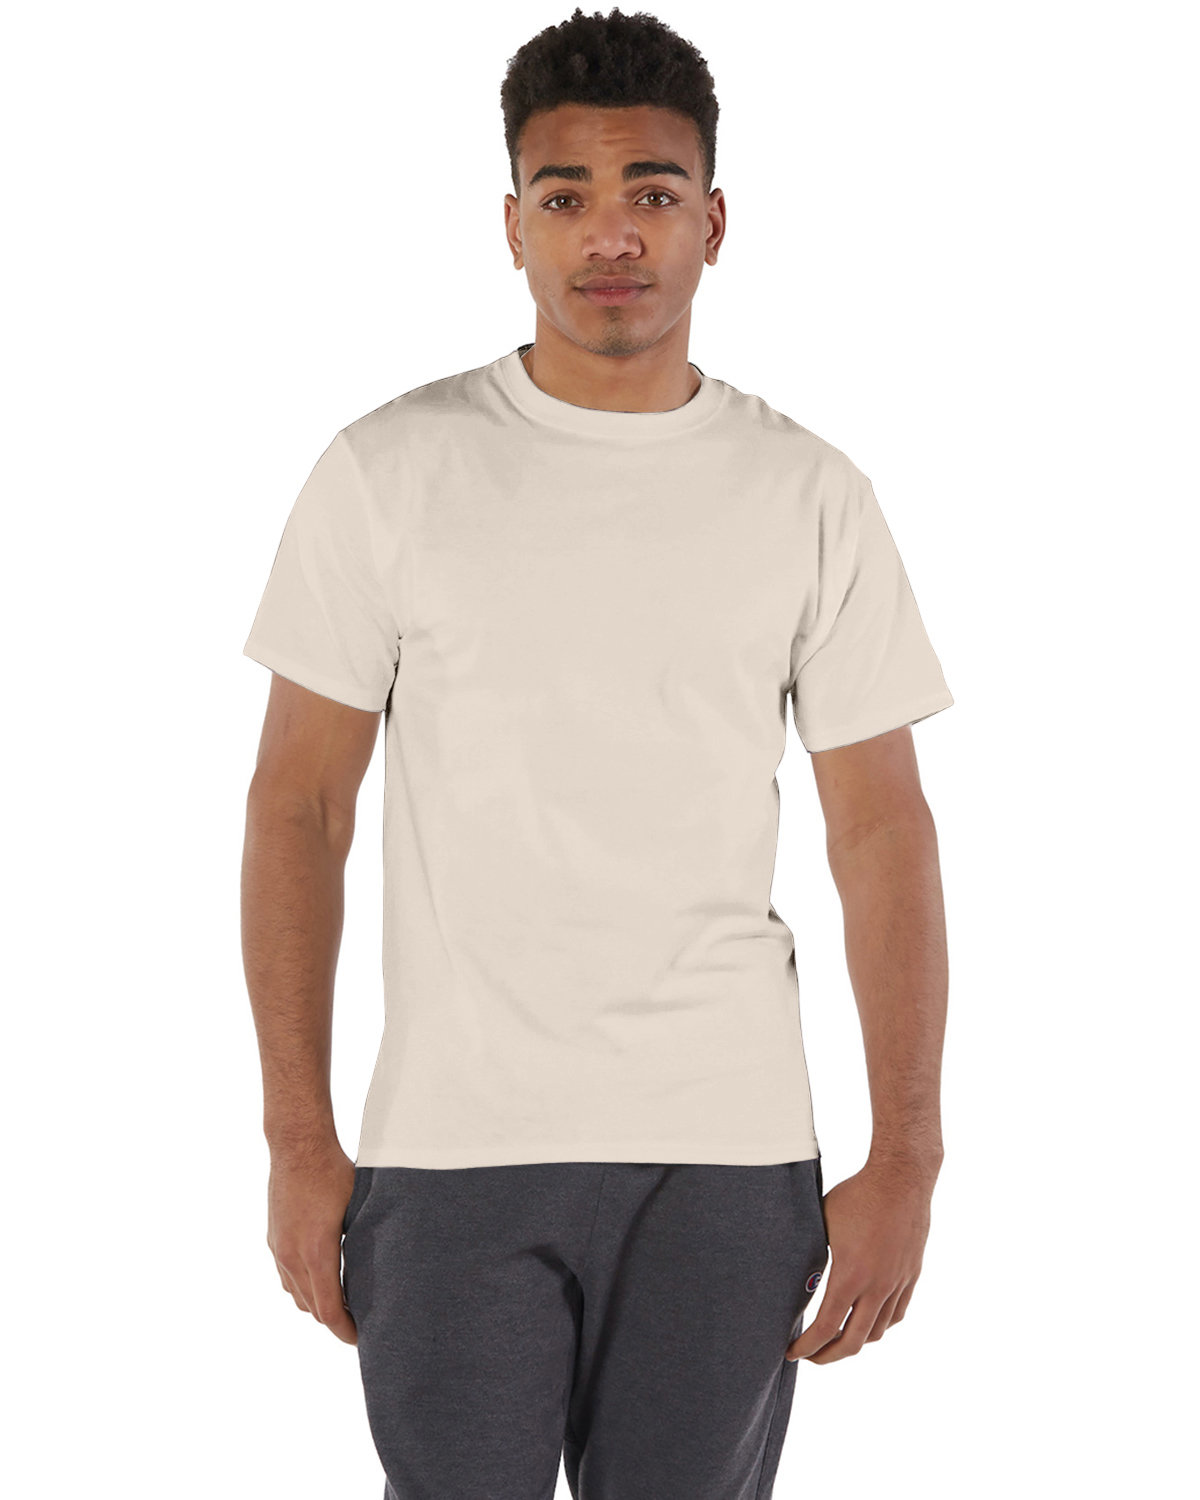 Men's Champion Short Sleeve T-Shirt T105 Review - Quirky Neighbor